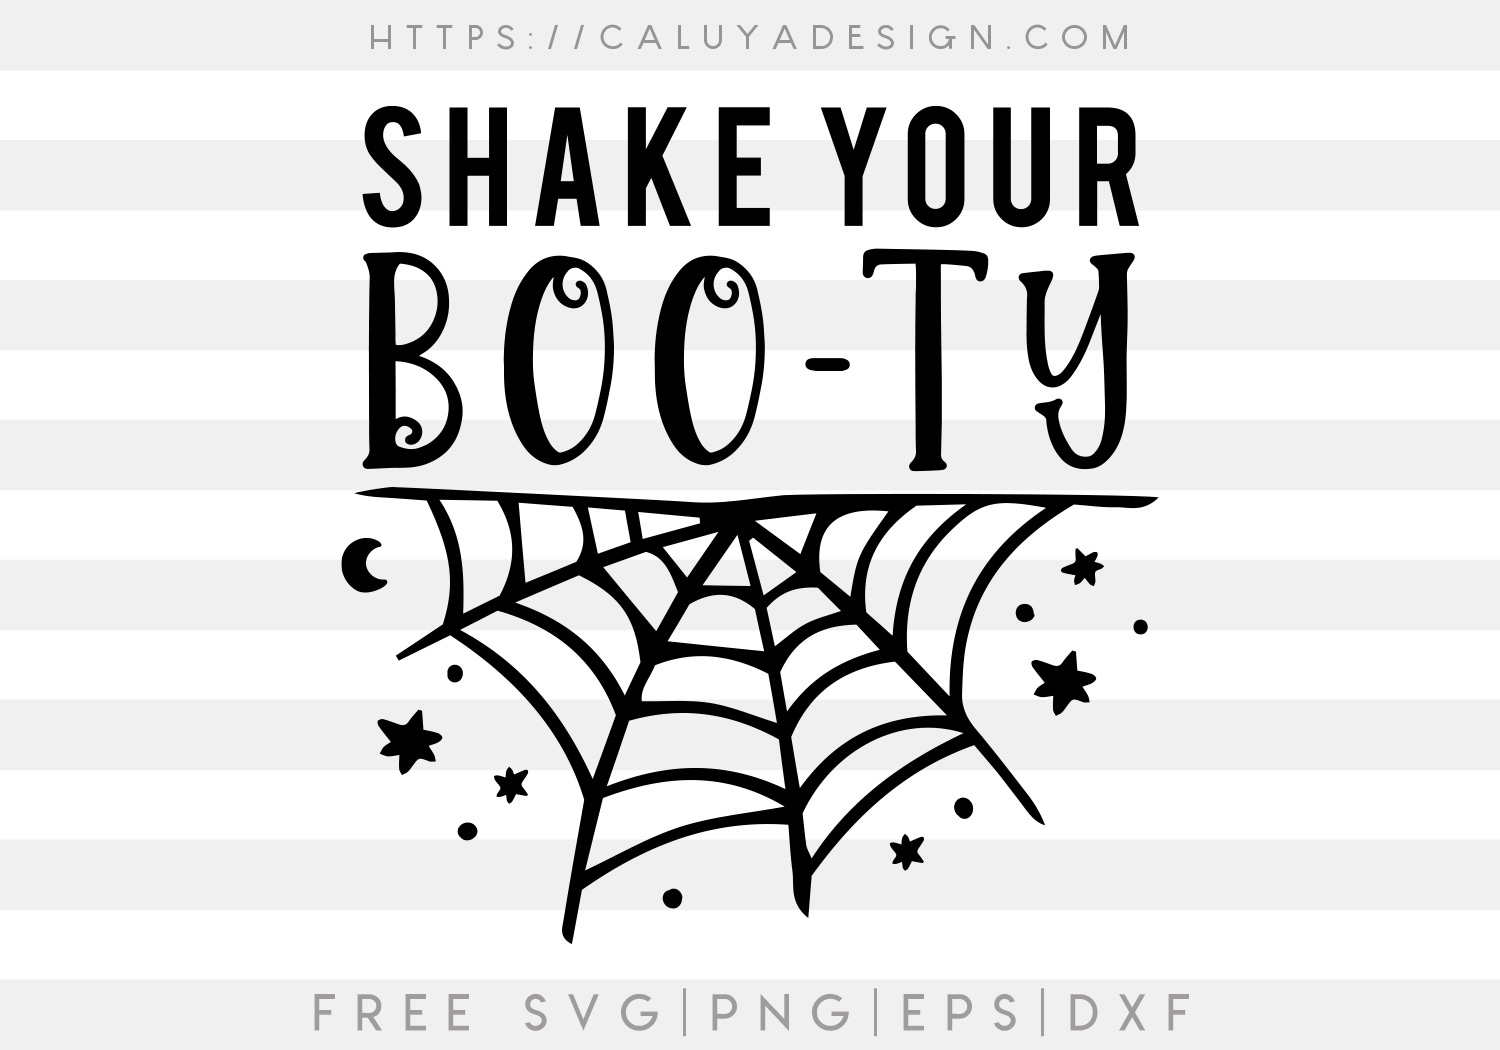 Shake Your Booty SVG, PNG, EPS & DXF